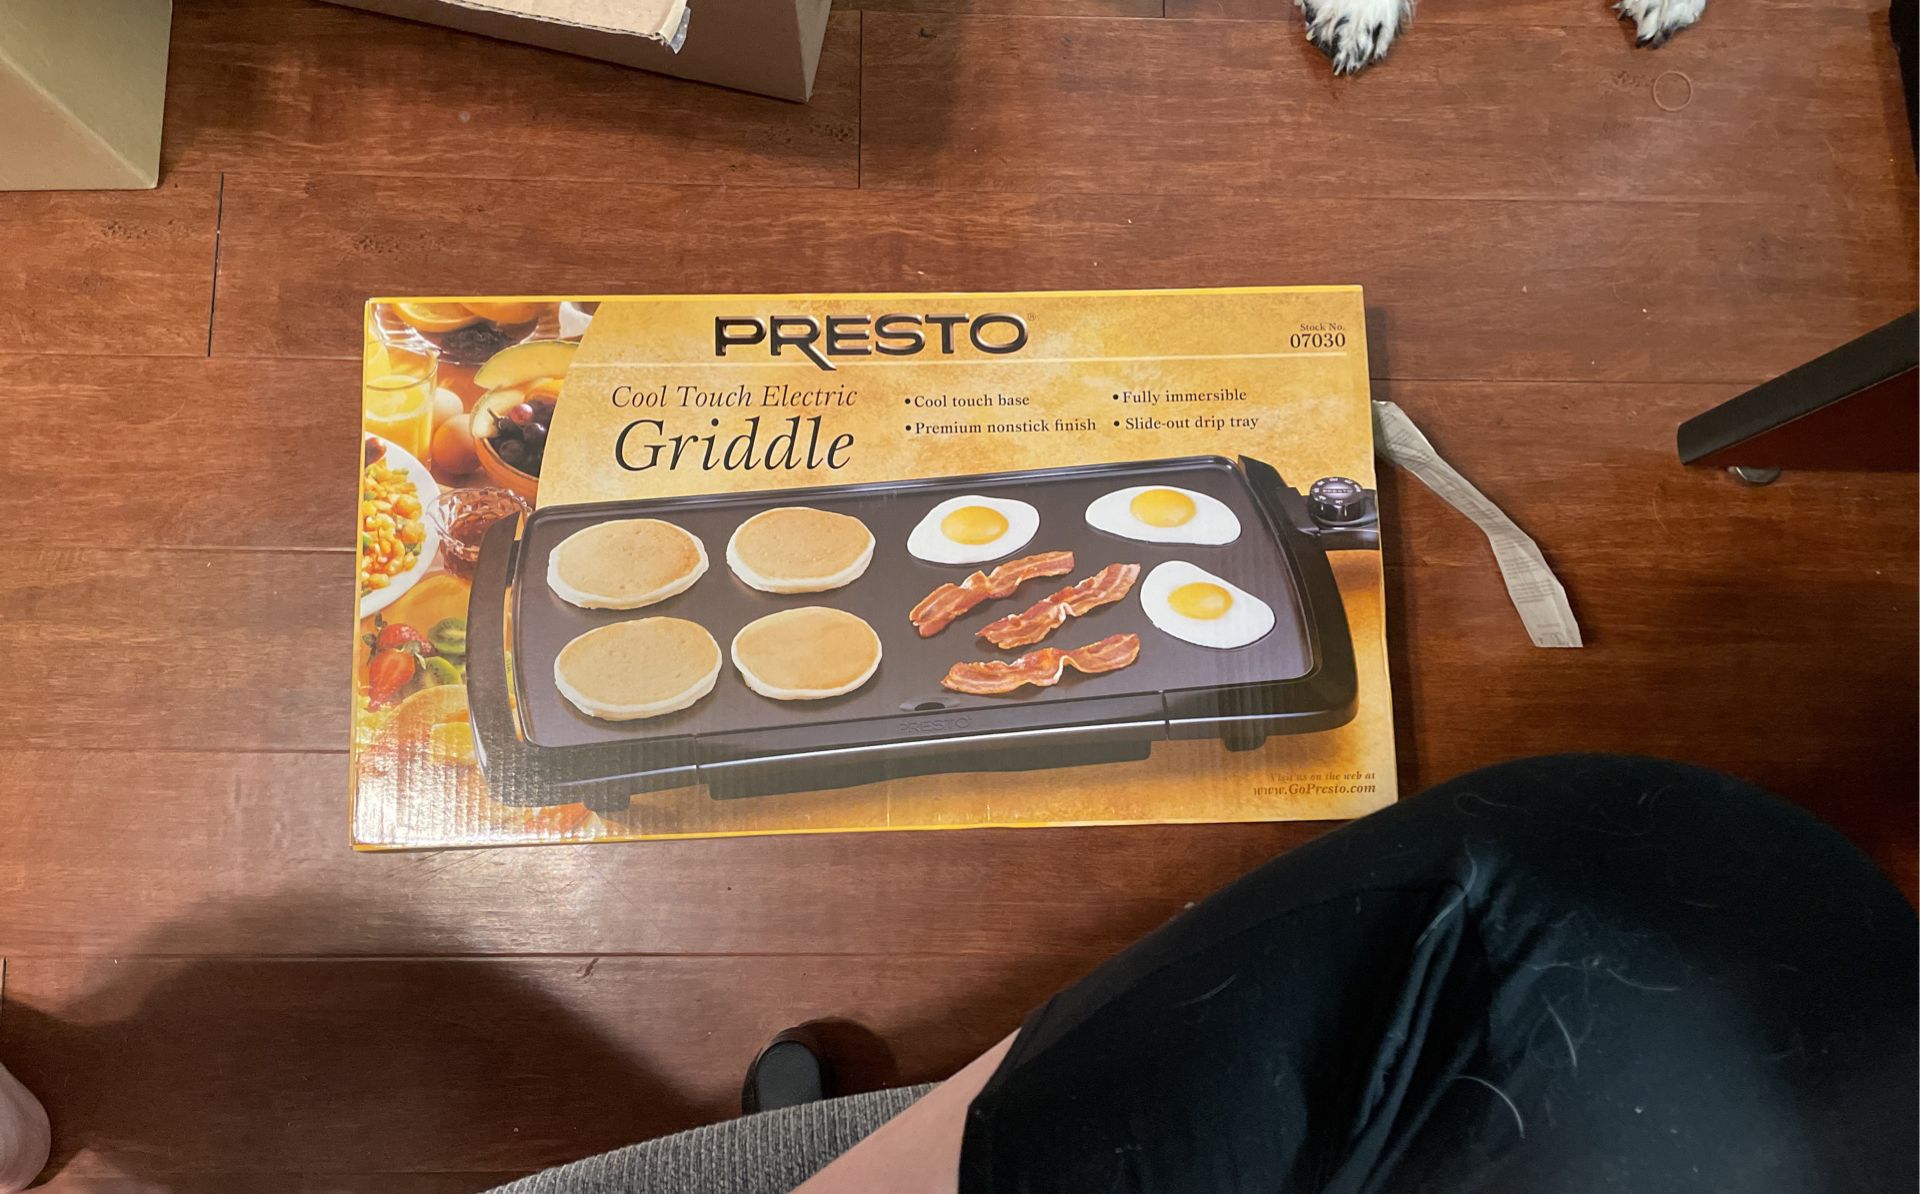 Presto Cool Touch Electric Griddle - Never Used